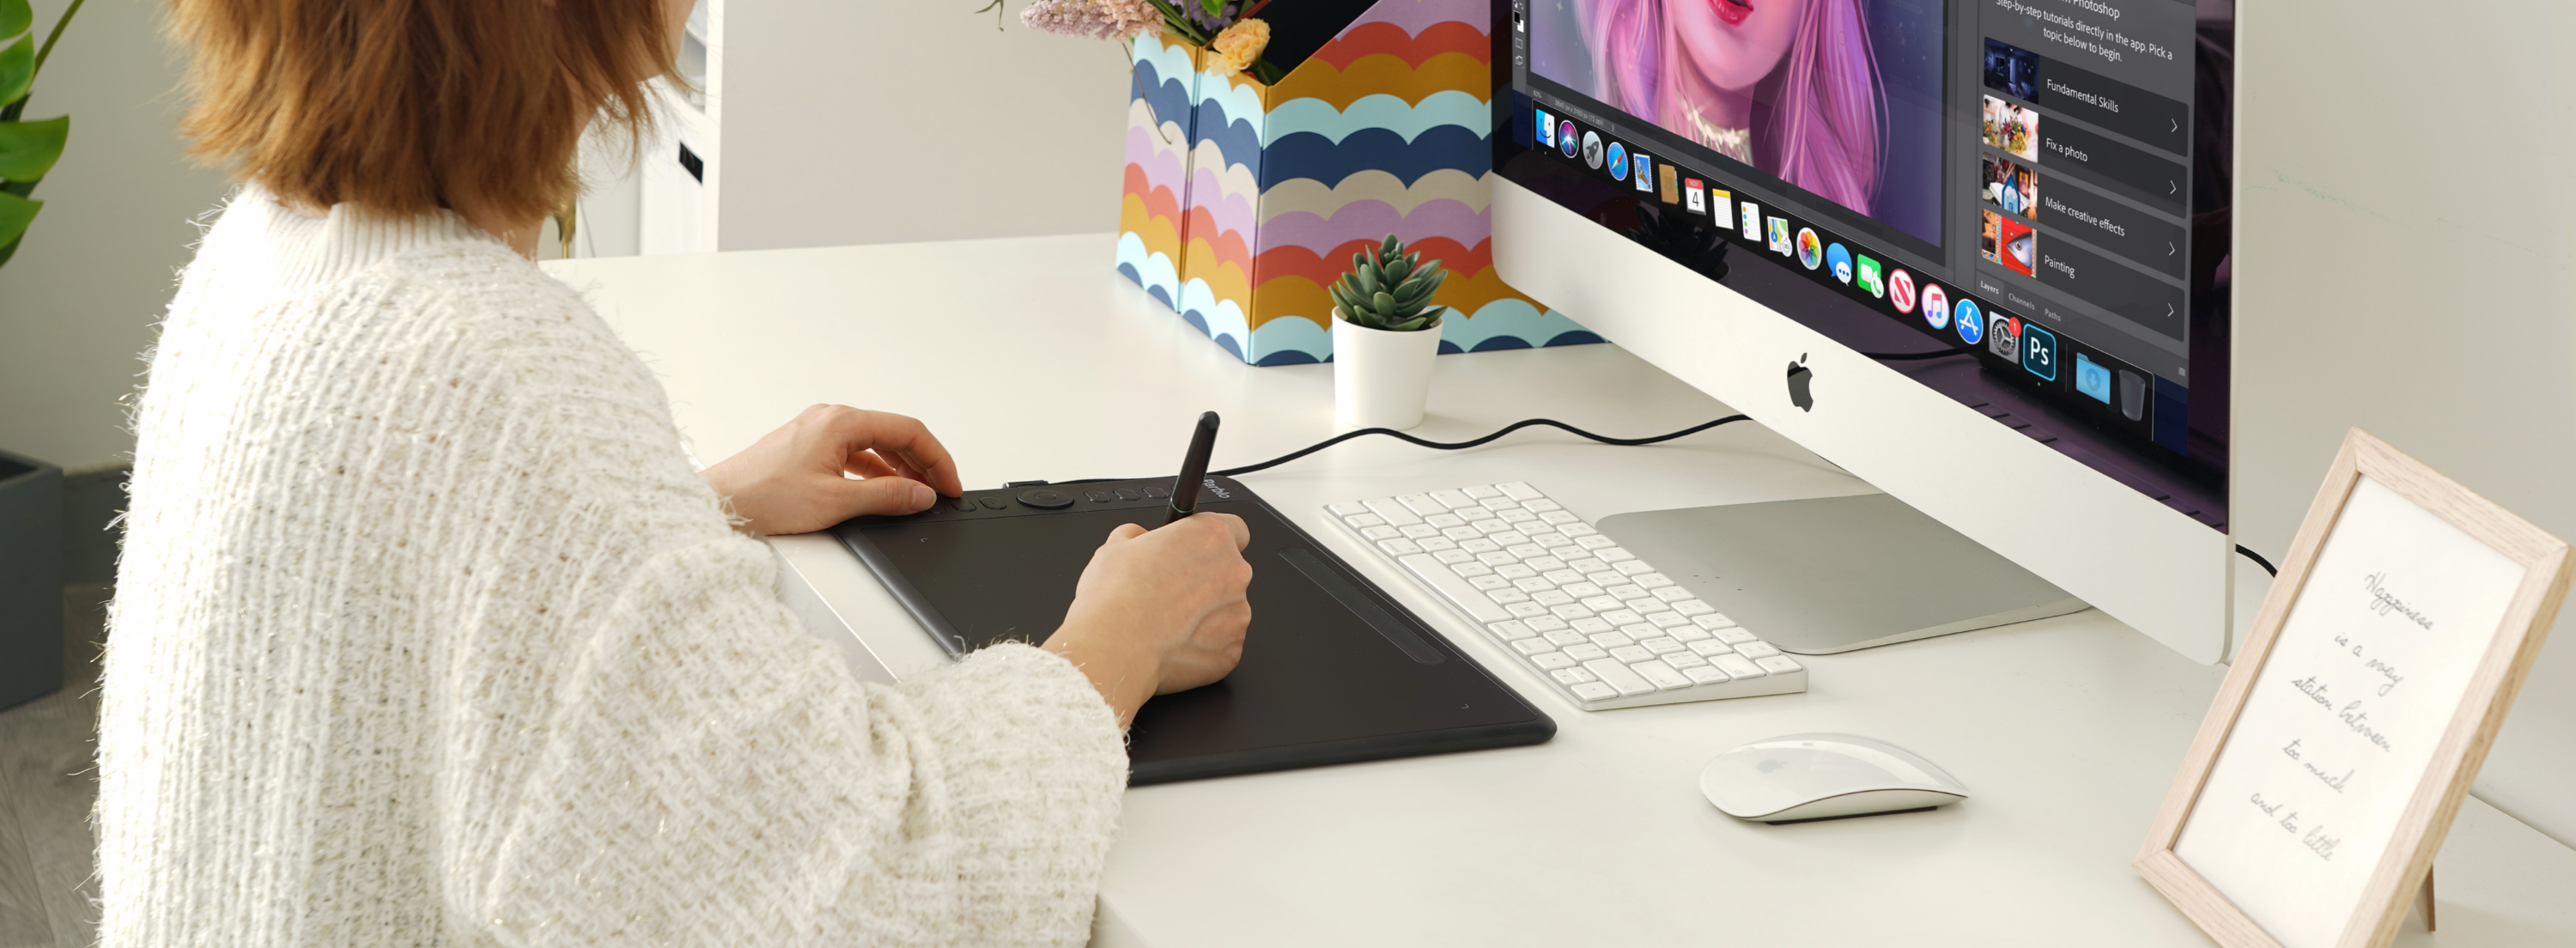 Parblo releases the first Purple drawing tablet